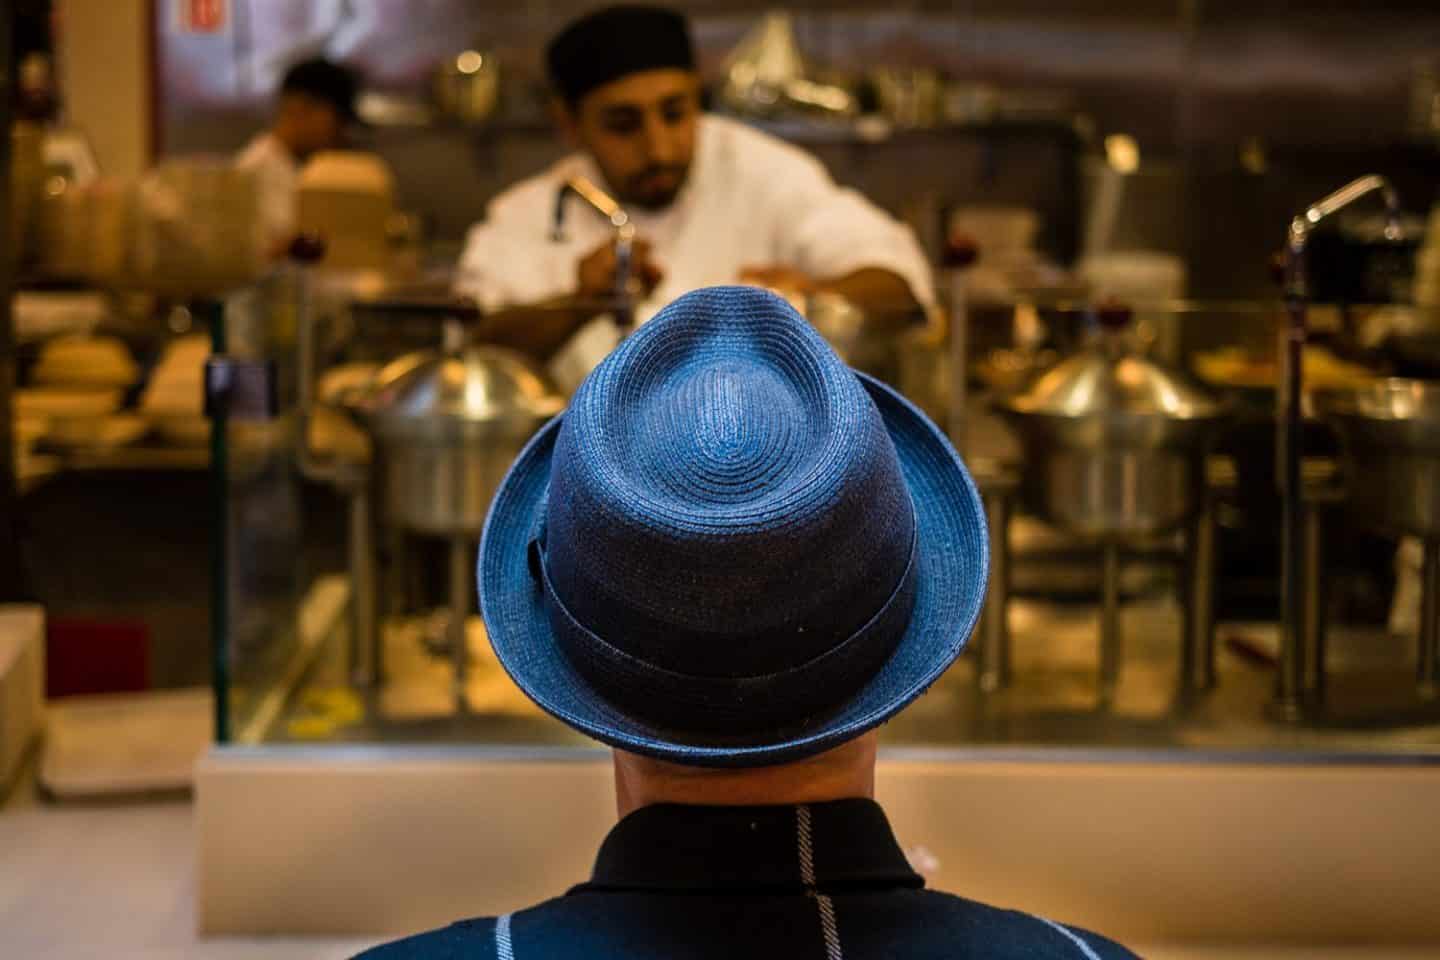 Man in Blue Hat by Ibarionex Perello